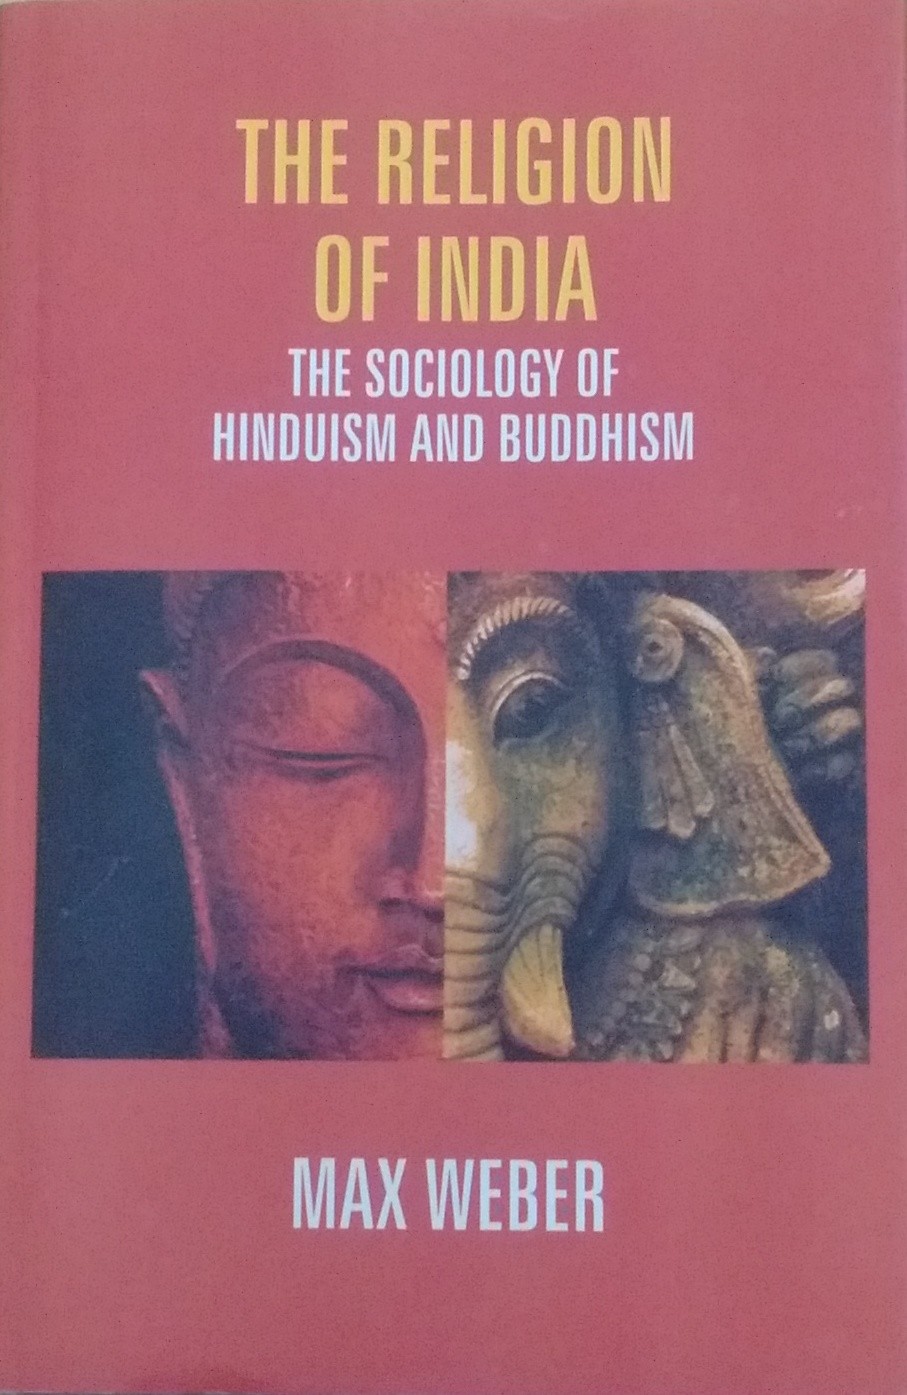 Religion of India: The Sociology of Hinduism and Buddhism